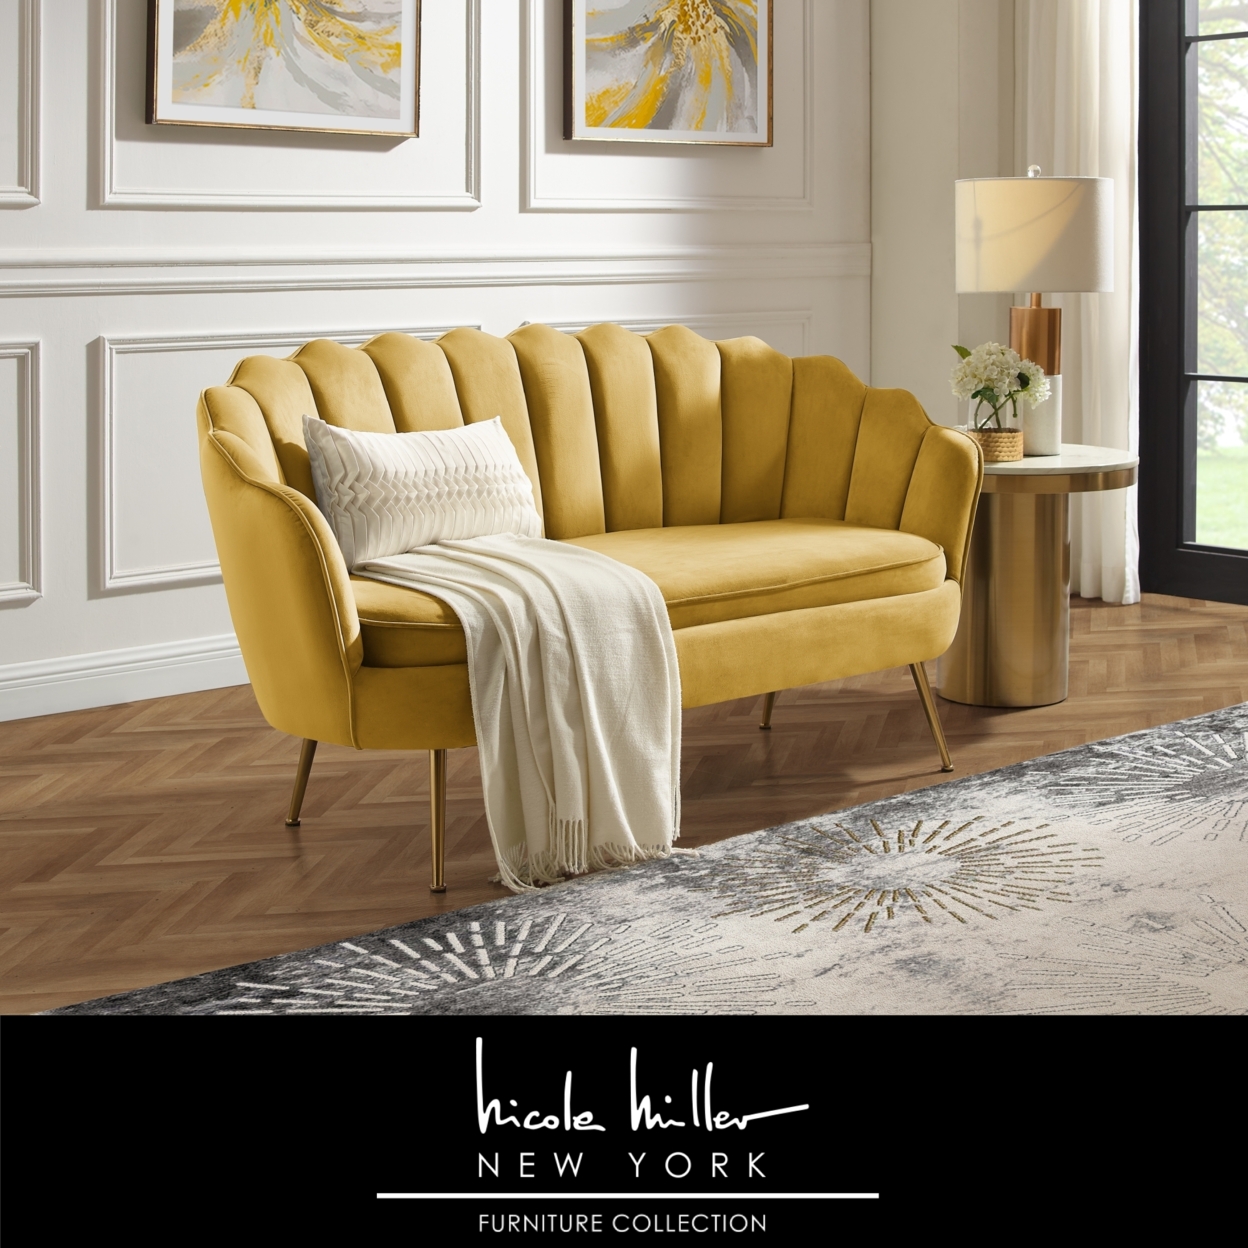 Dallin Loveseat - Upholstered Channel Tufted, Scalloped Edges, Tapered Polished Gold Legs - Black